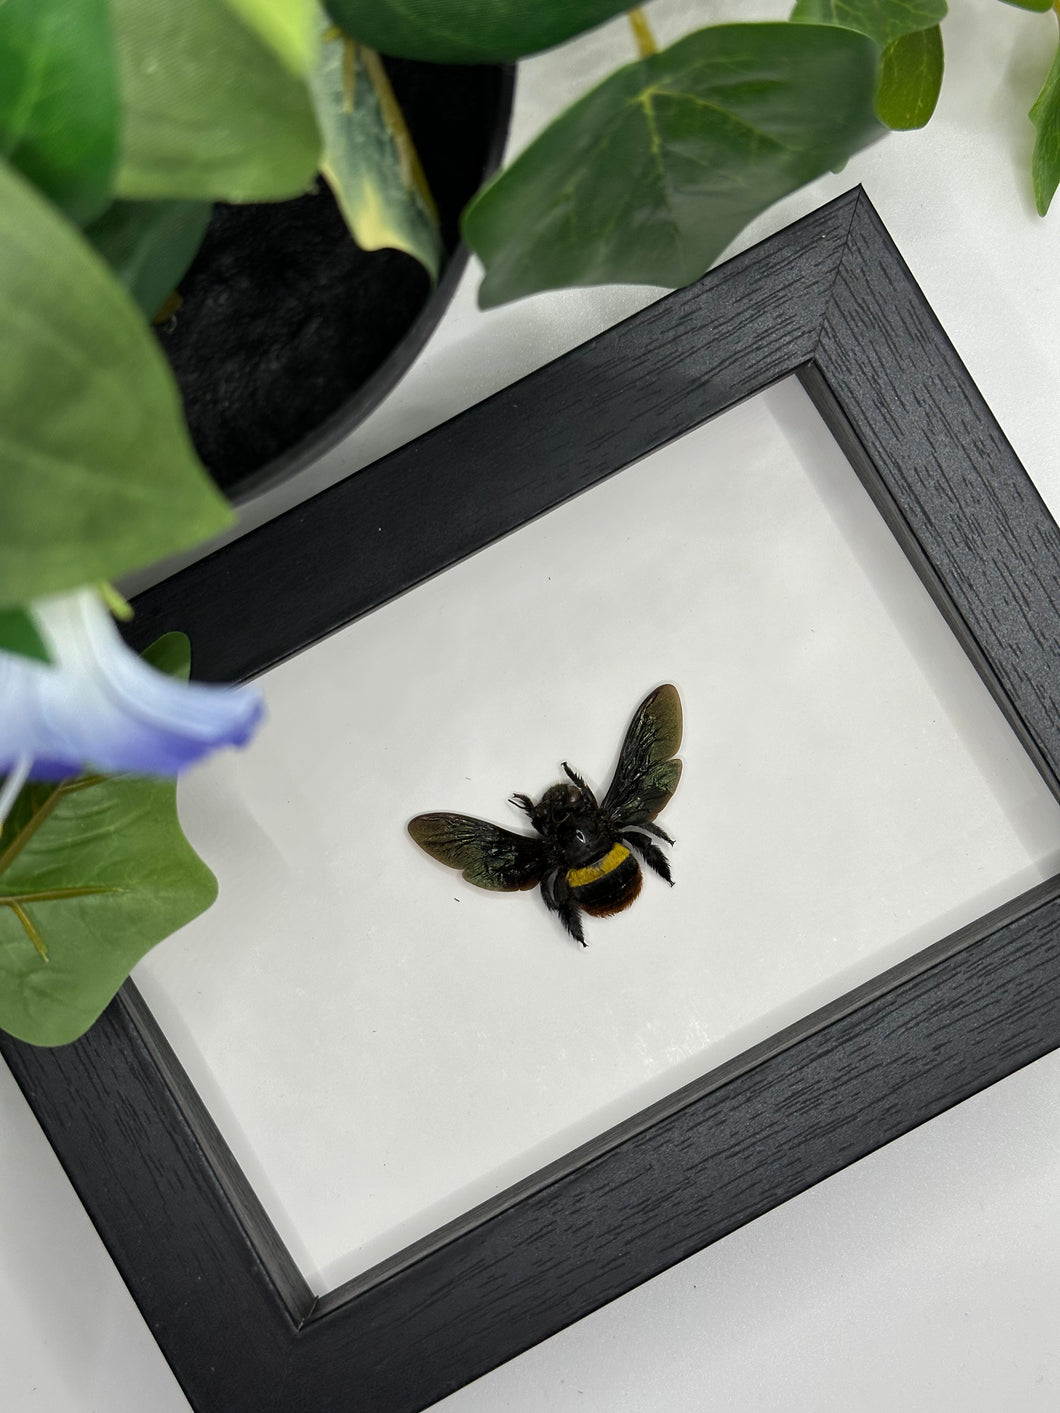 Tricoloured Carpenter Bee / Xylocopa Tricolor in a frame